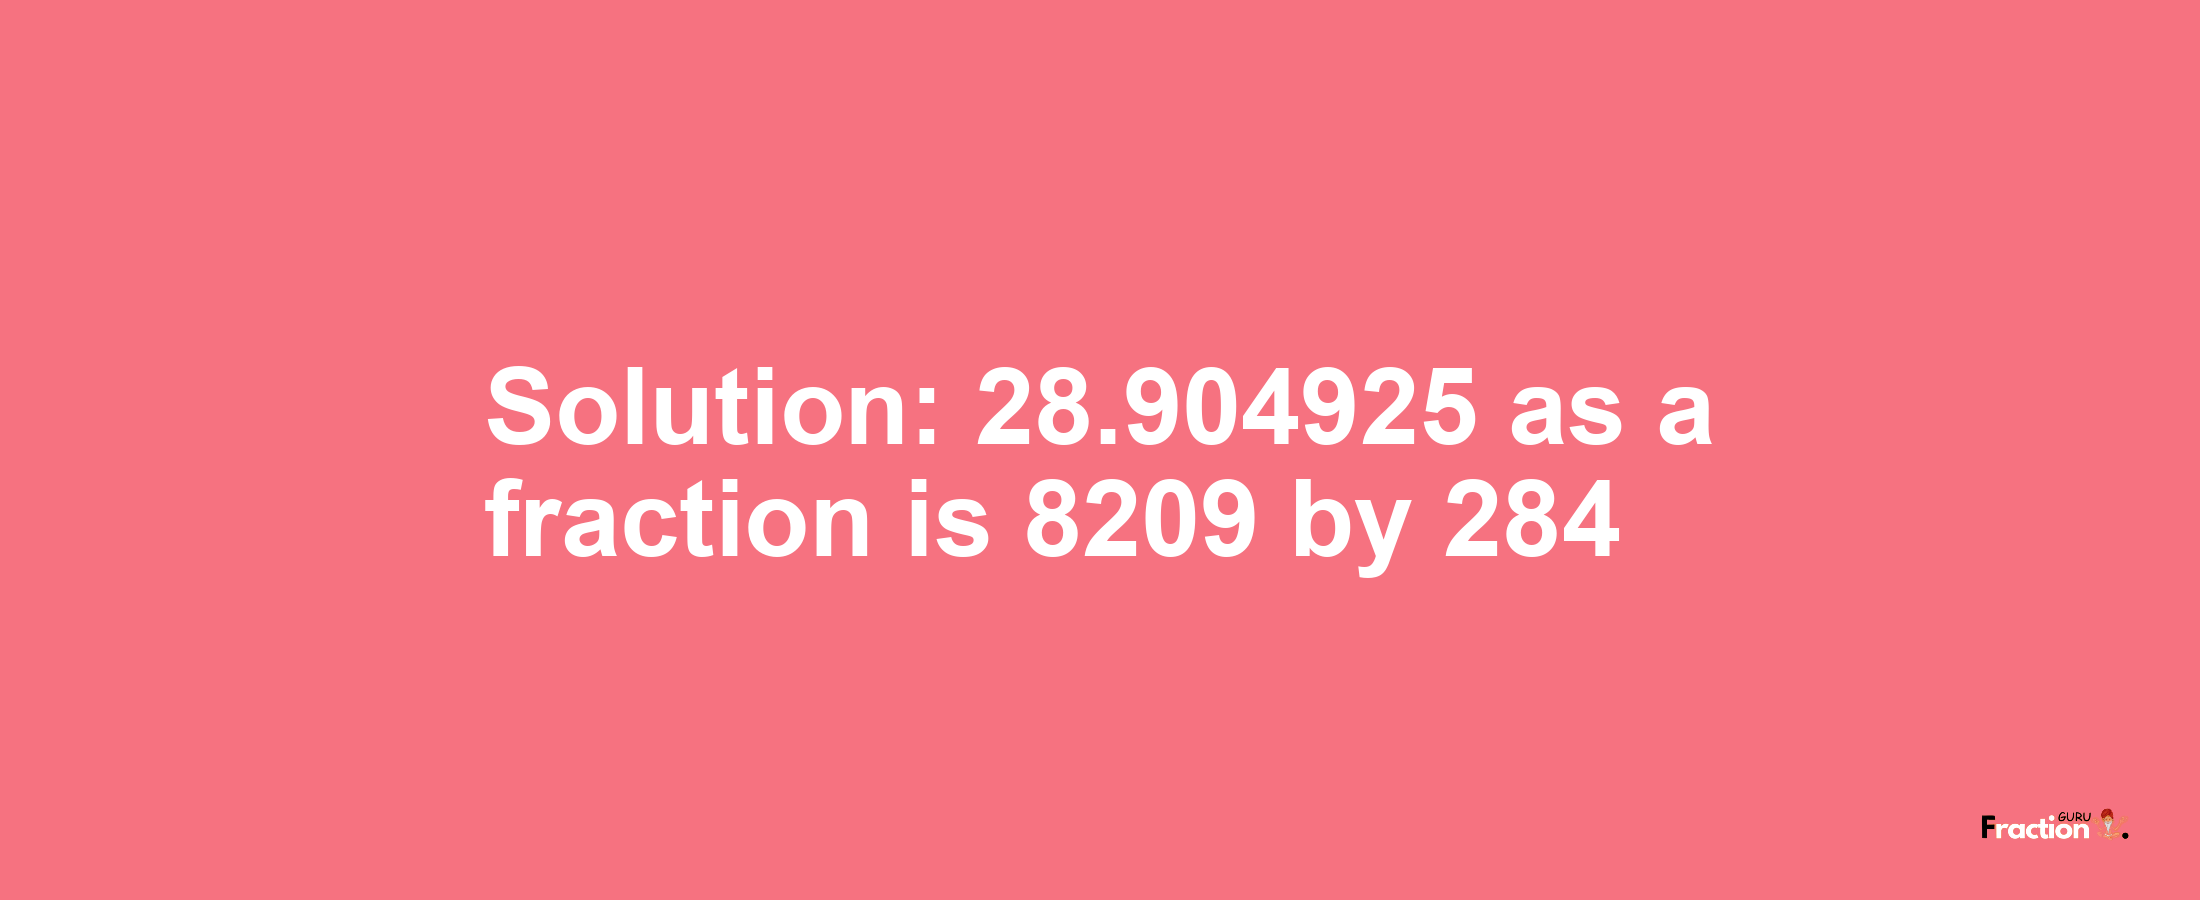 Solution:28.904925 as a fraction is 8209/284